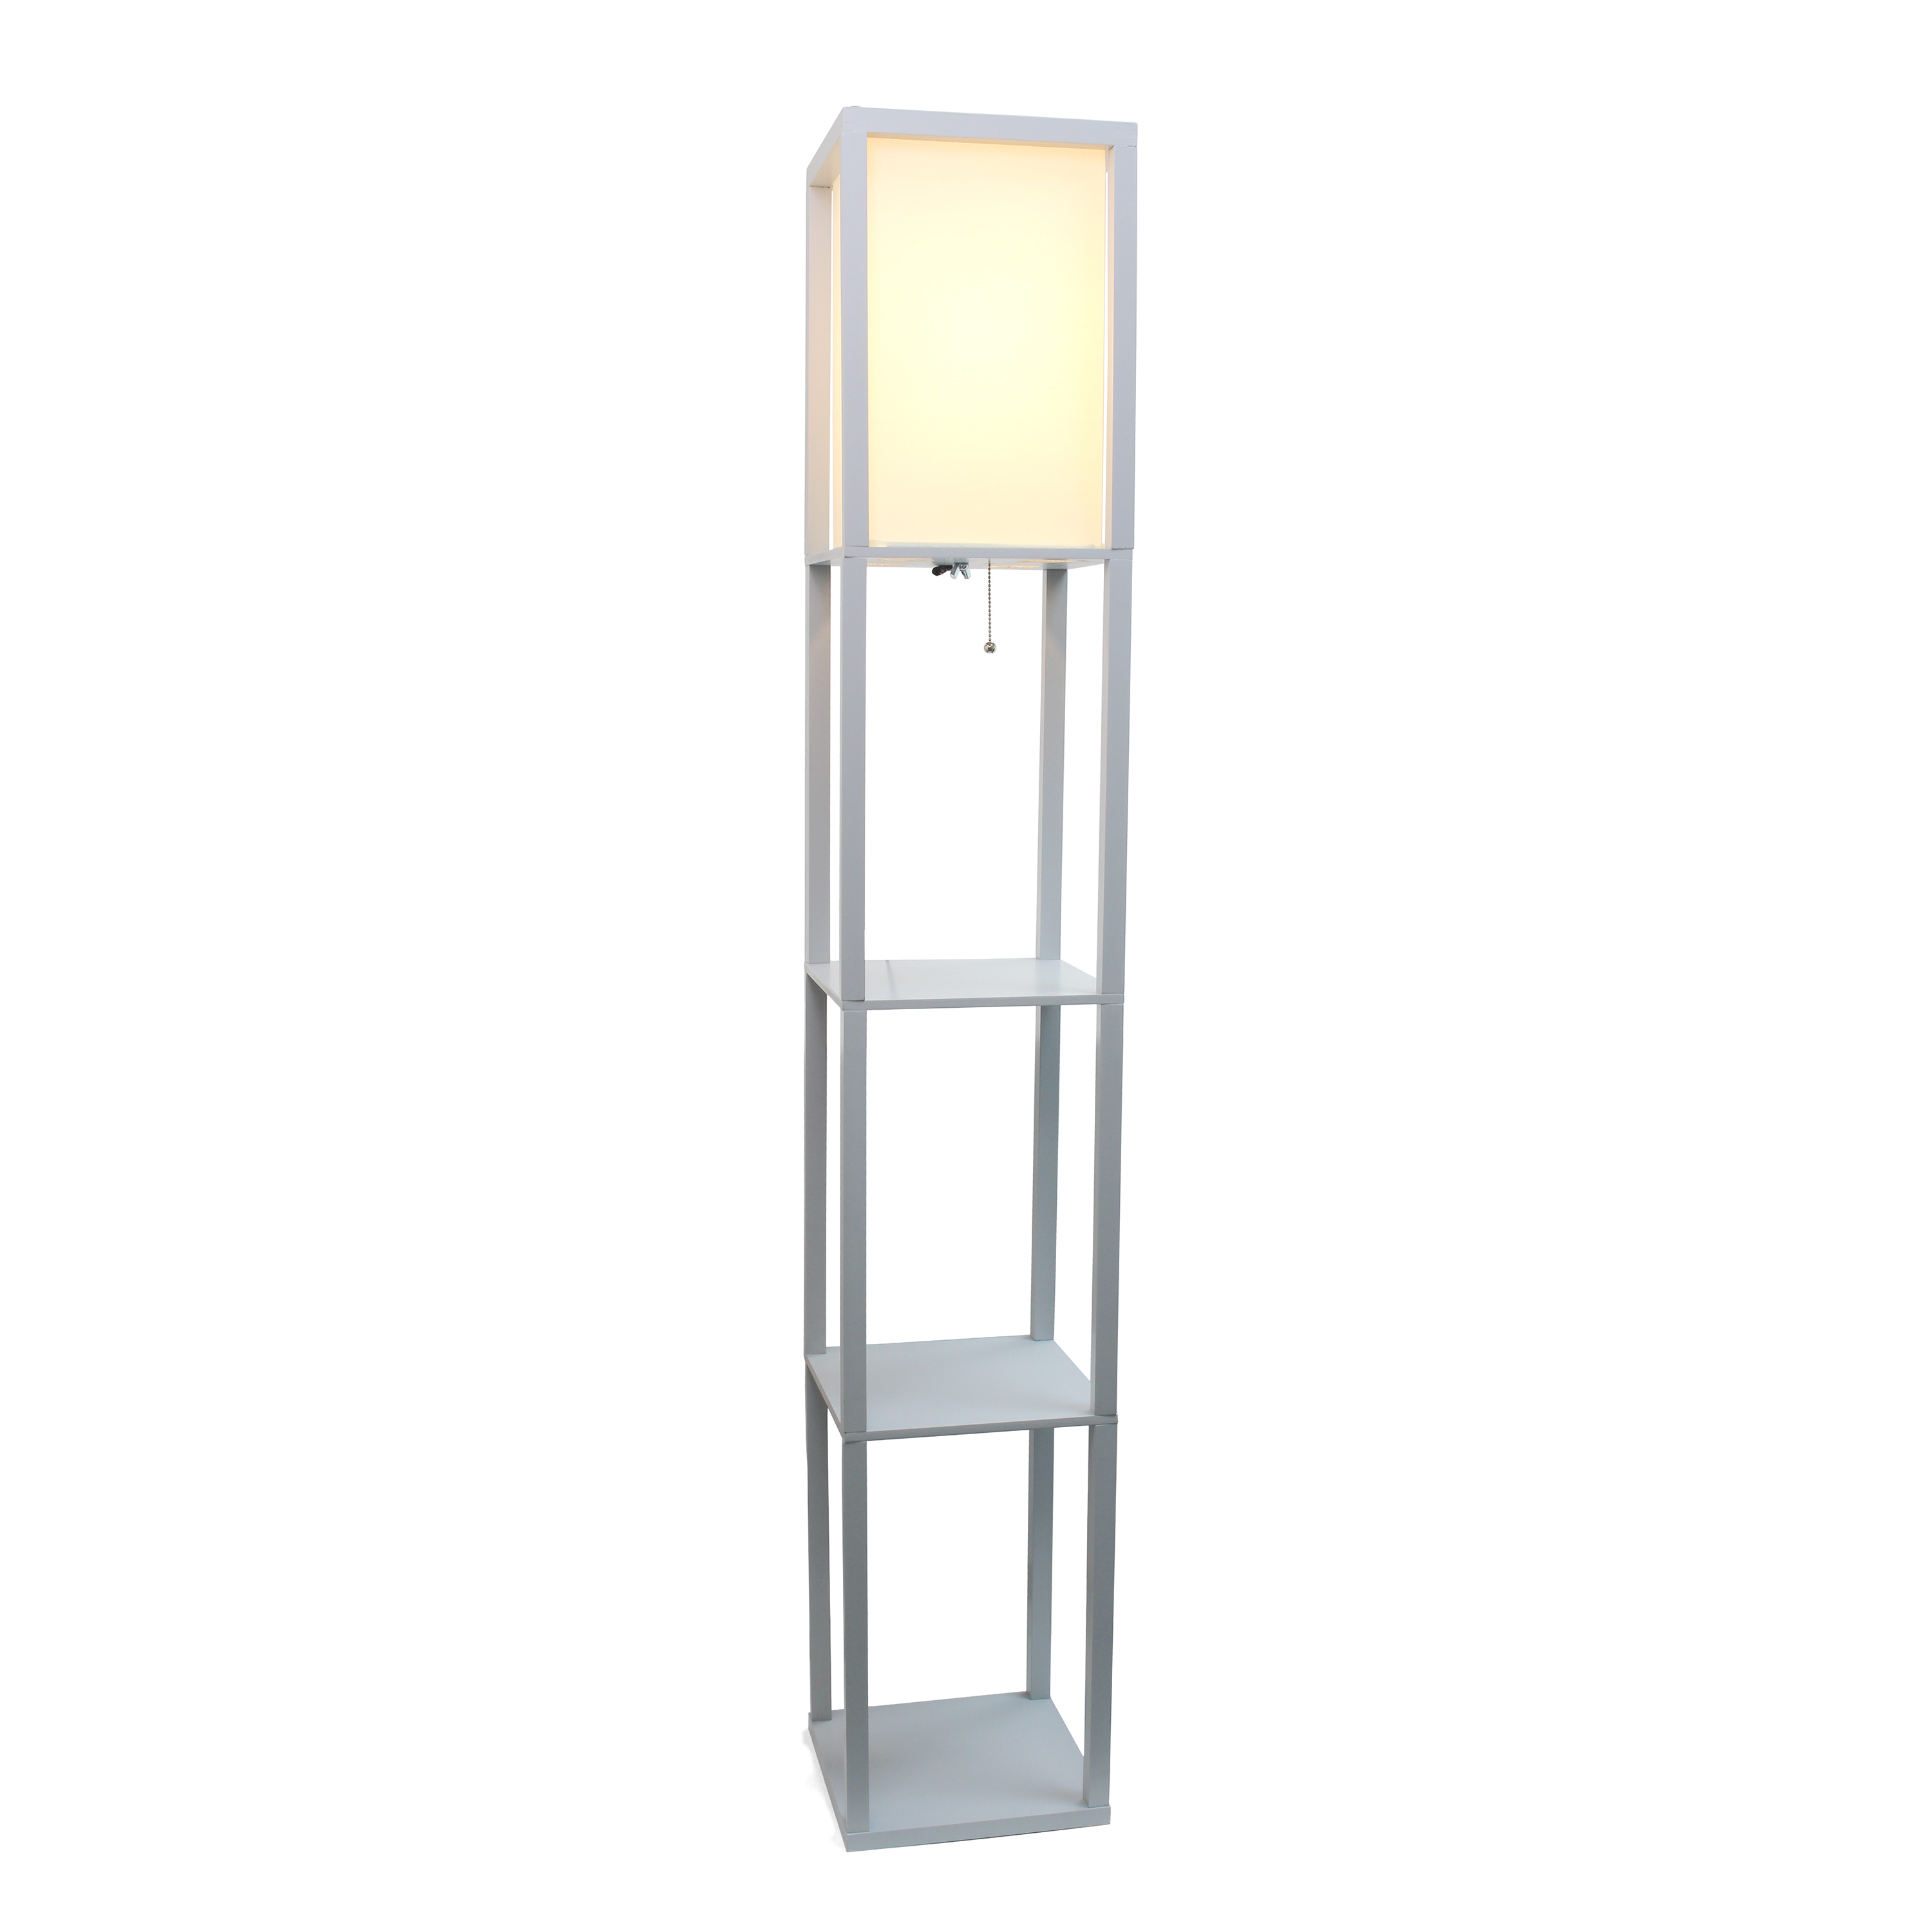 Simple Designs 62.5" Floor Lamp Etagere Organizer Storage Shelf with Linen Shade, Gray - image 3 of 7